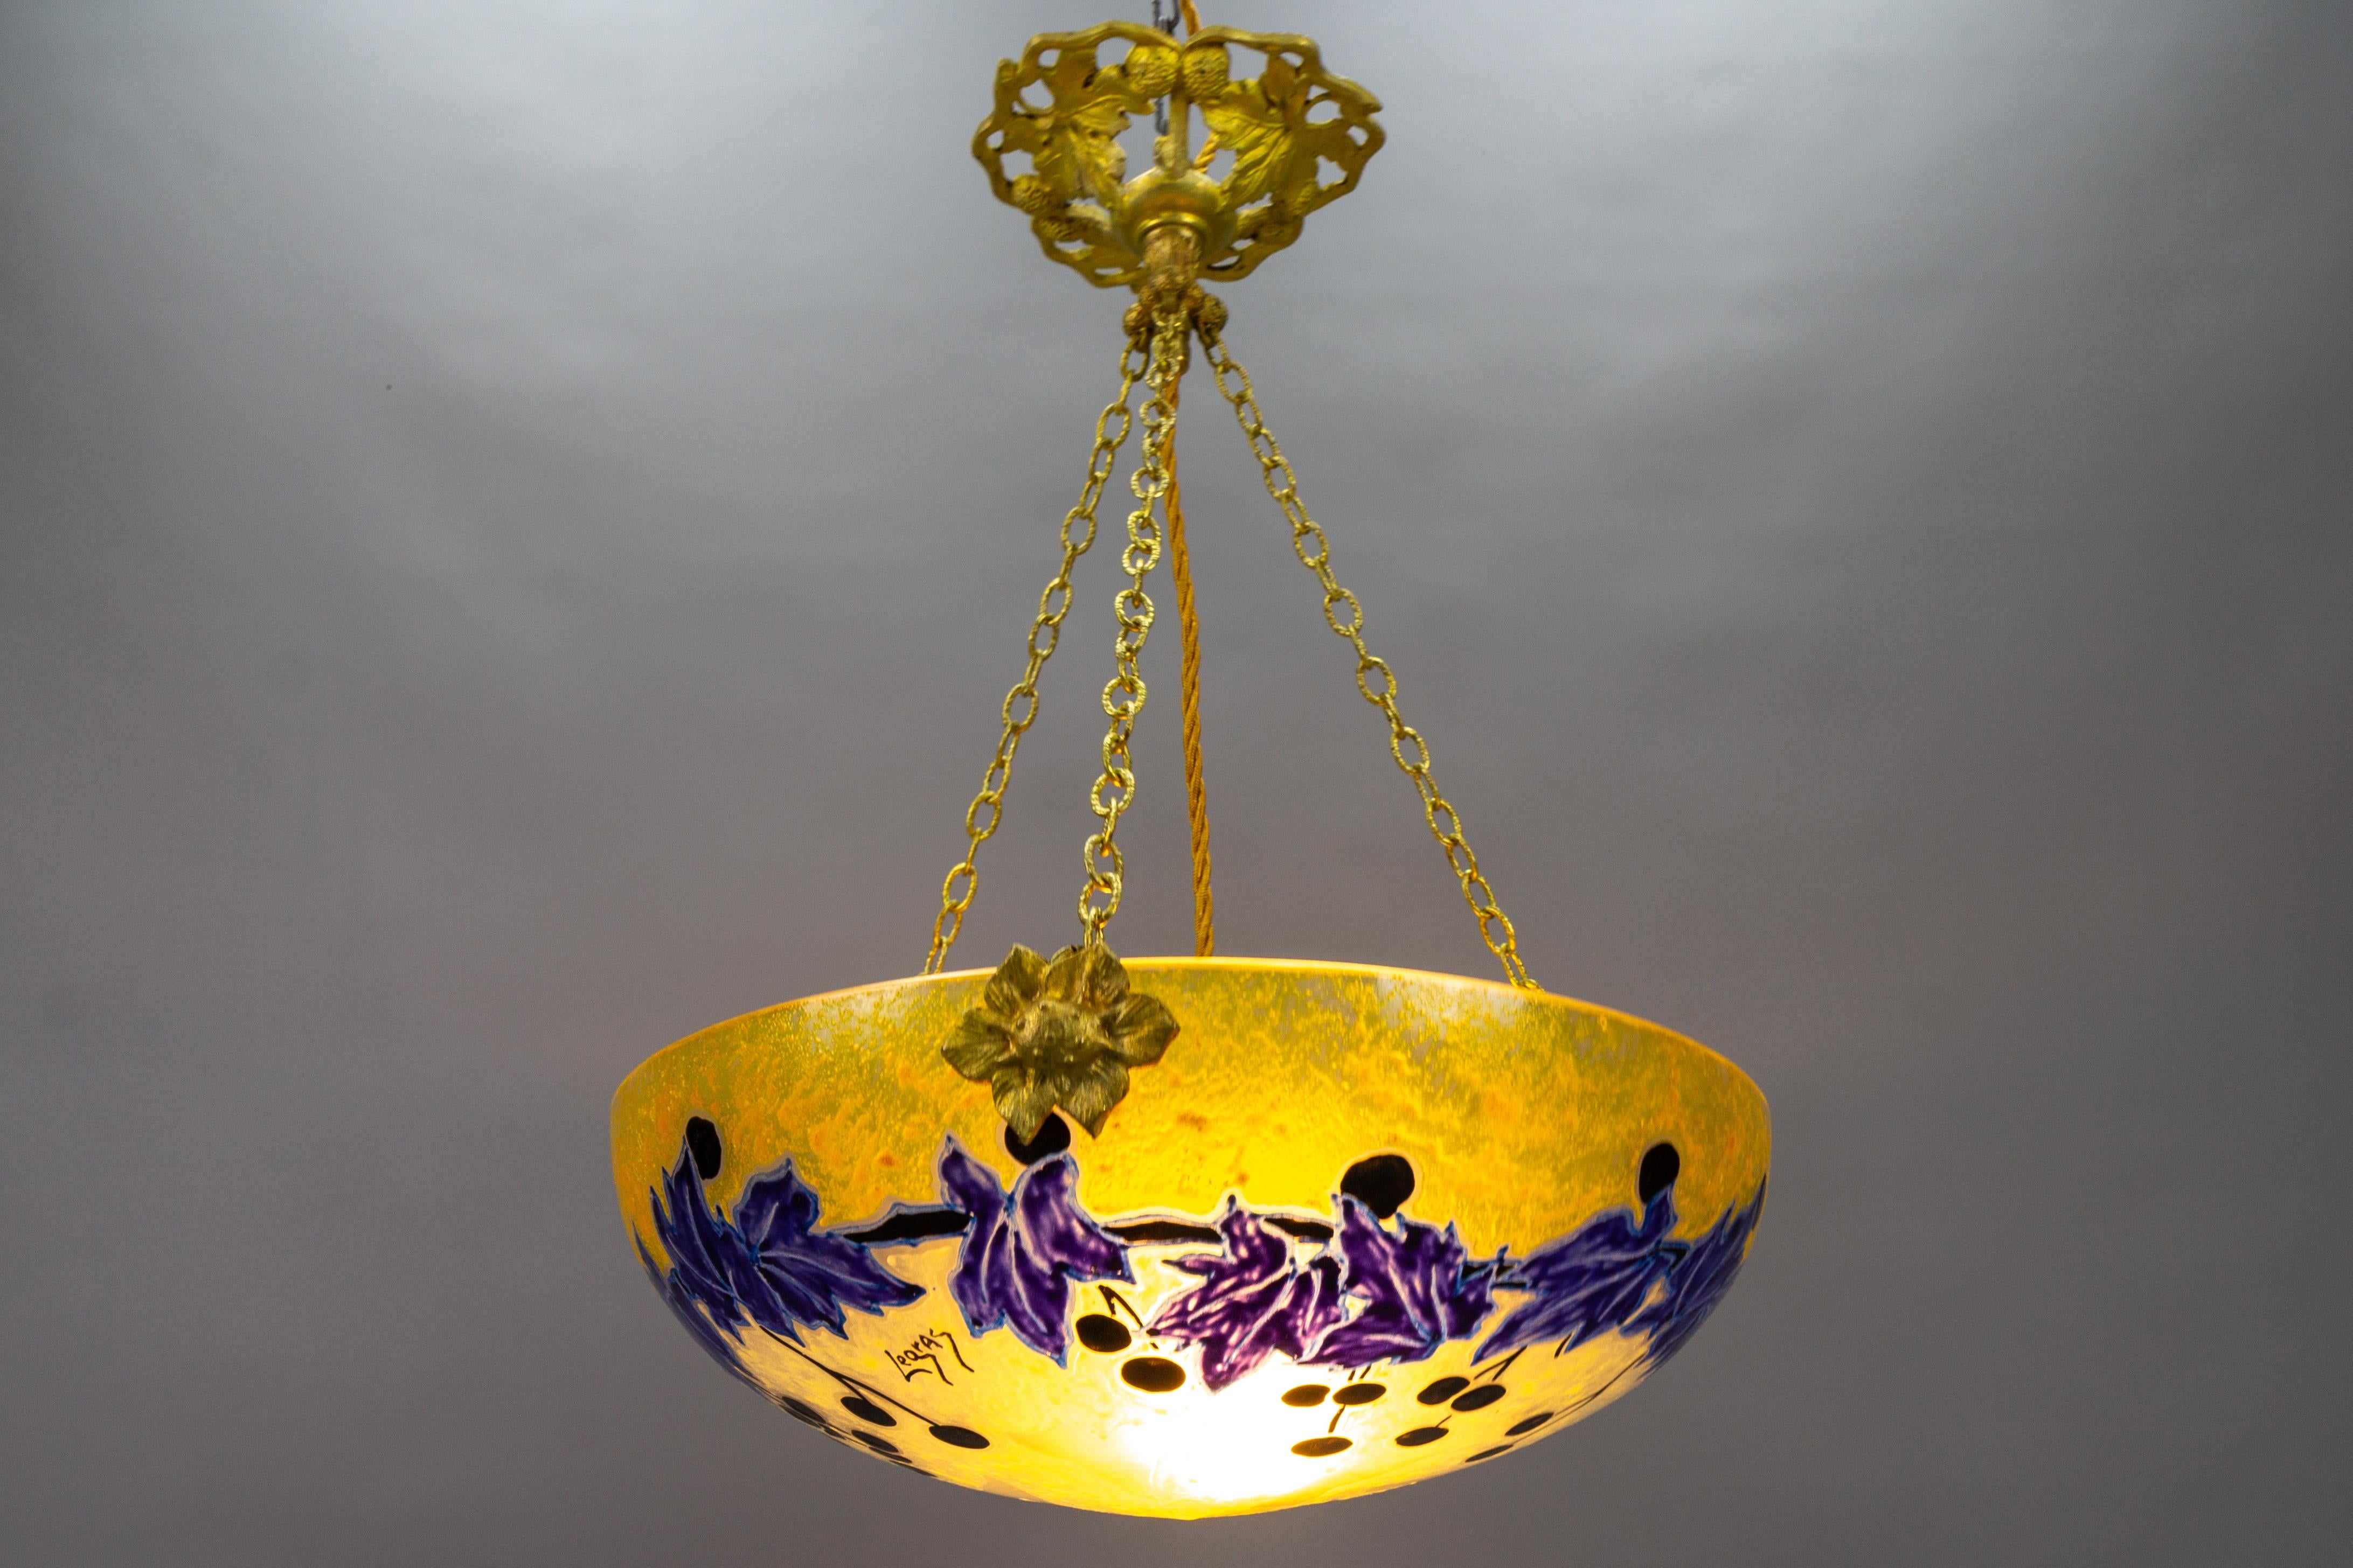 French Art Nouveau Pendant Light with Yellow and Blue Glass Ivy Motifs by Legras For Sale 2